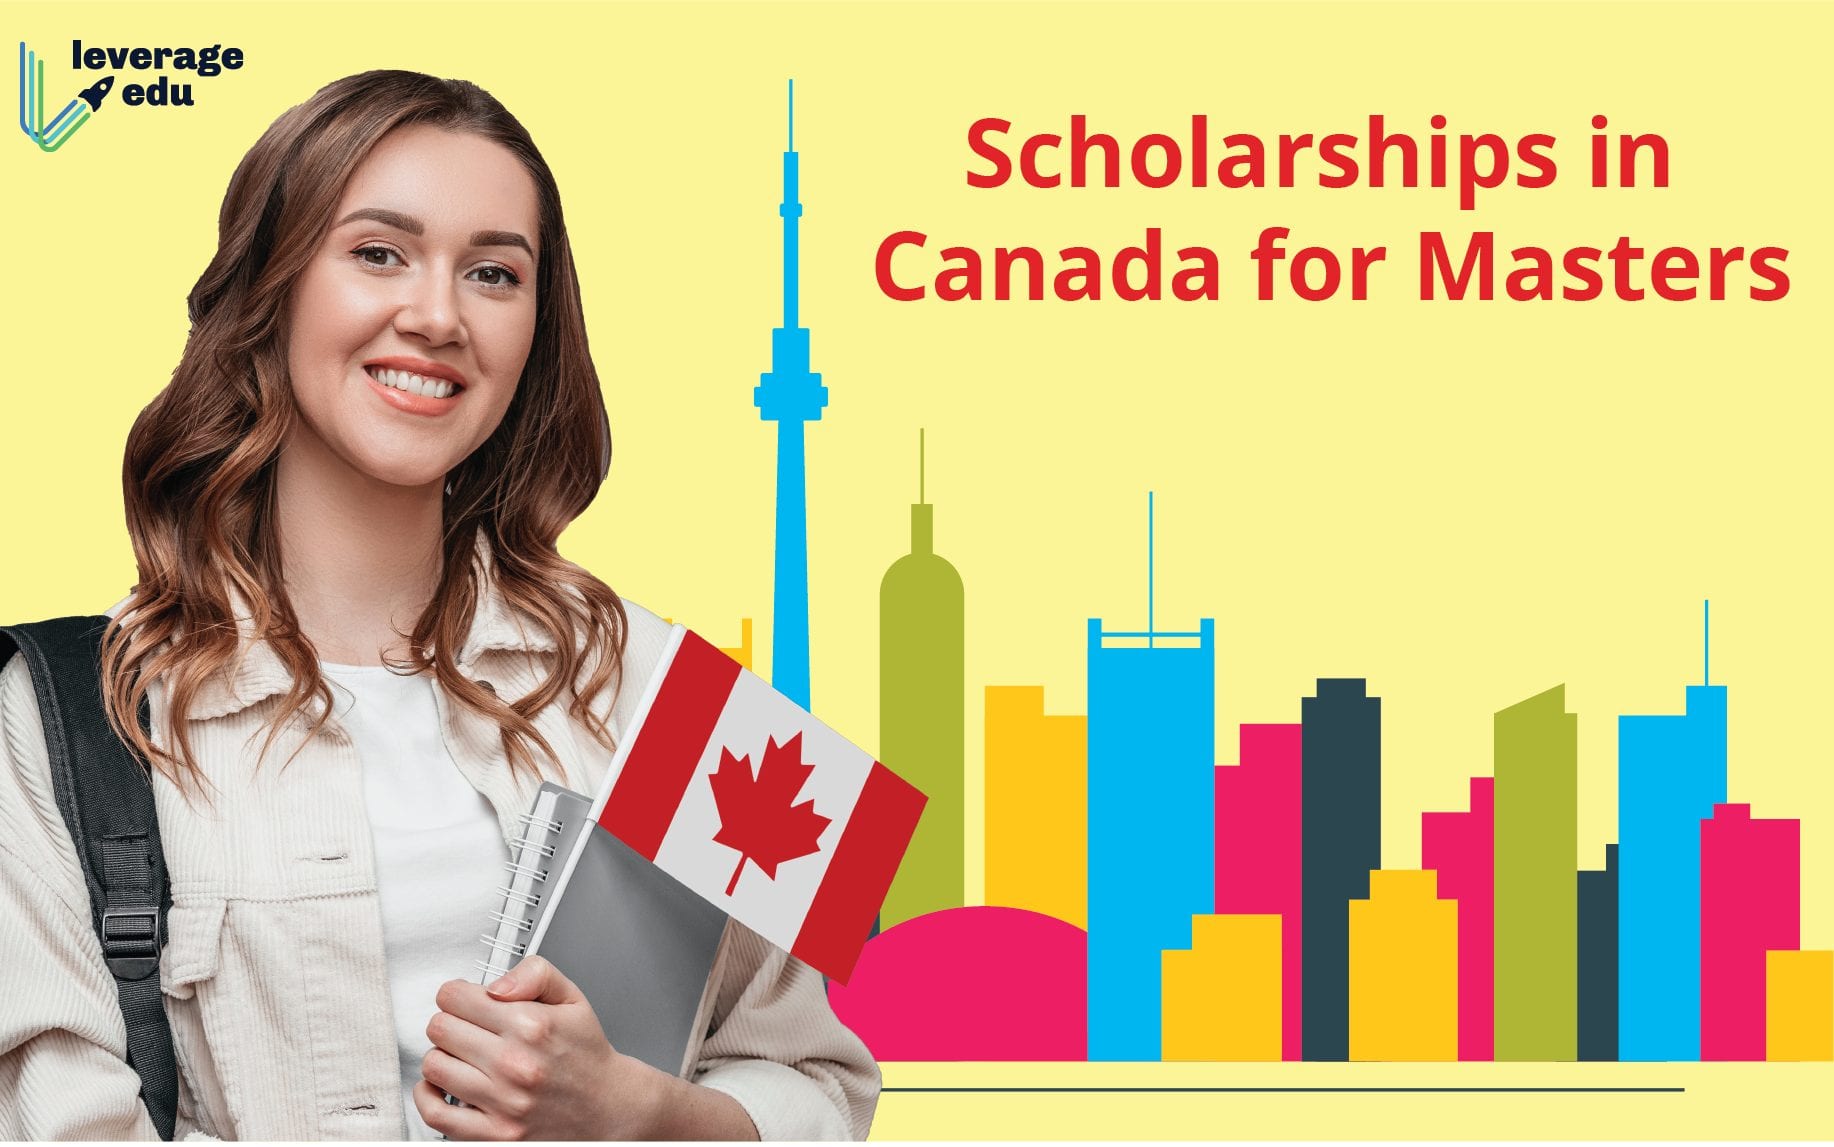 Scholarship in Canada for Masters - Top Scholarships - Leverage Edu